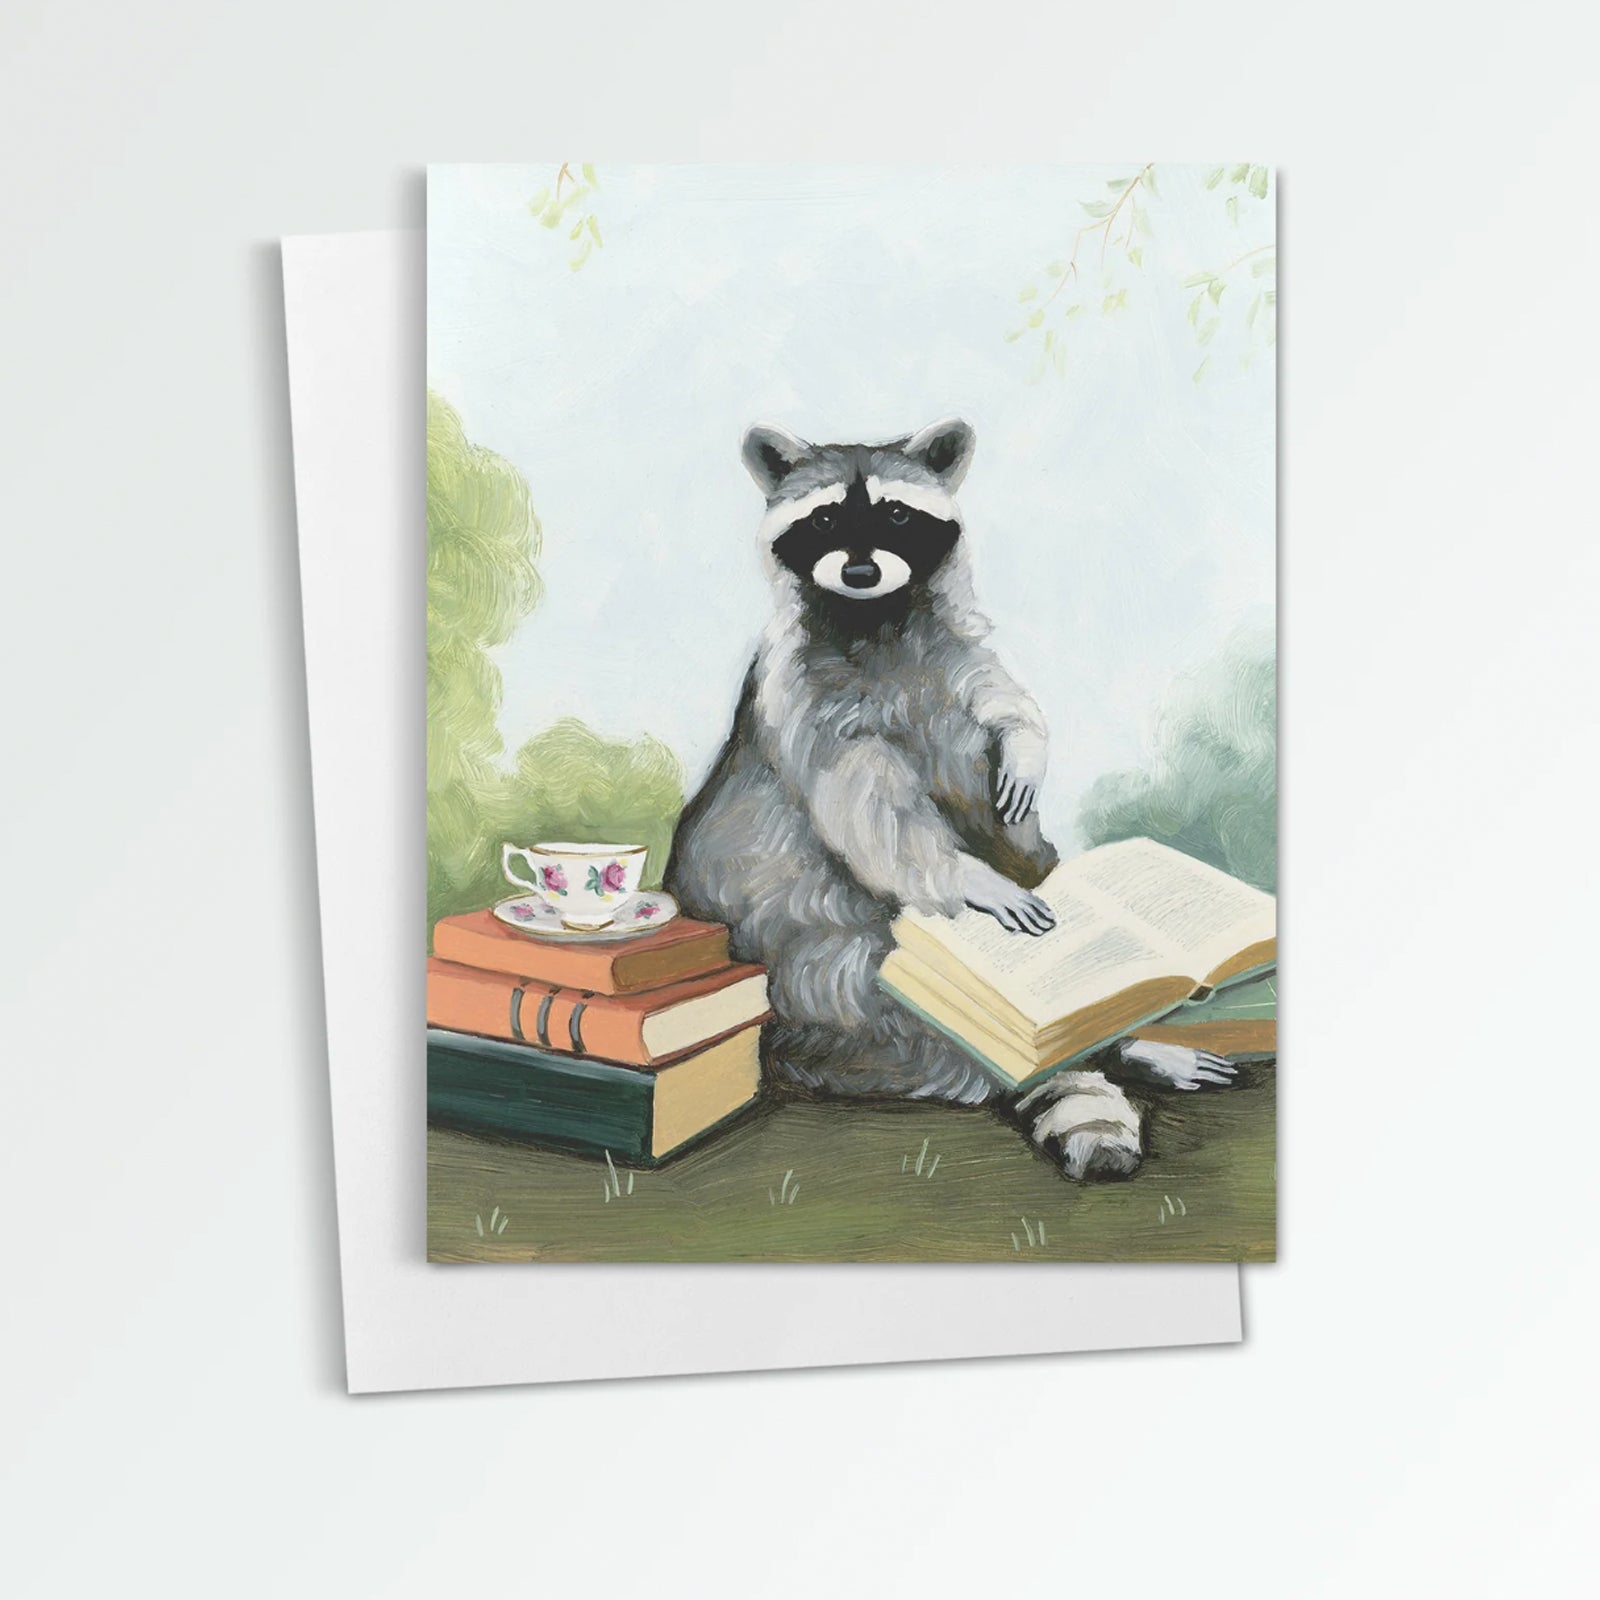 Tea & Books notecard from Kim Ferreira. A raccoon sits with a stack of books and cup of tea.